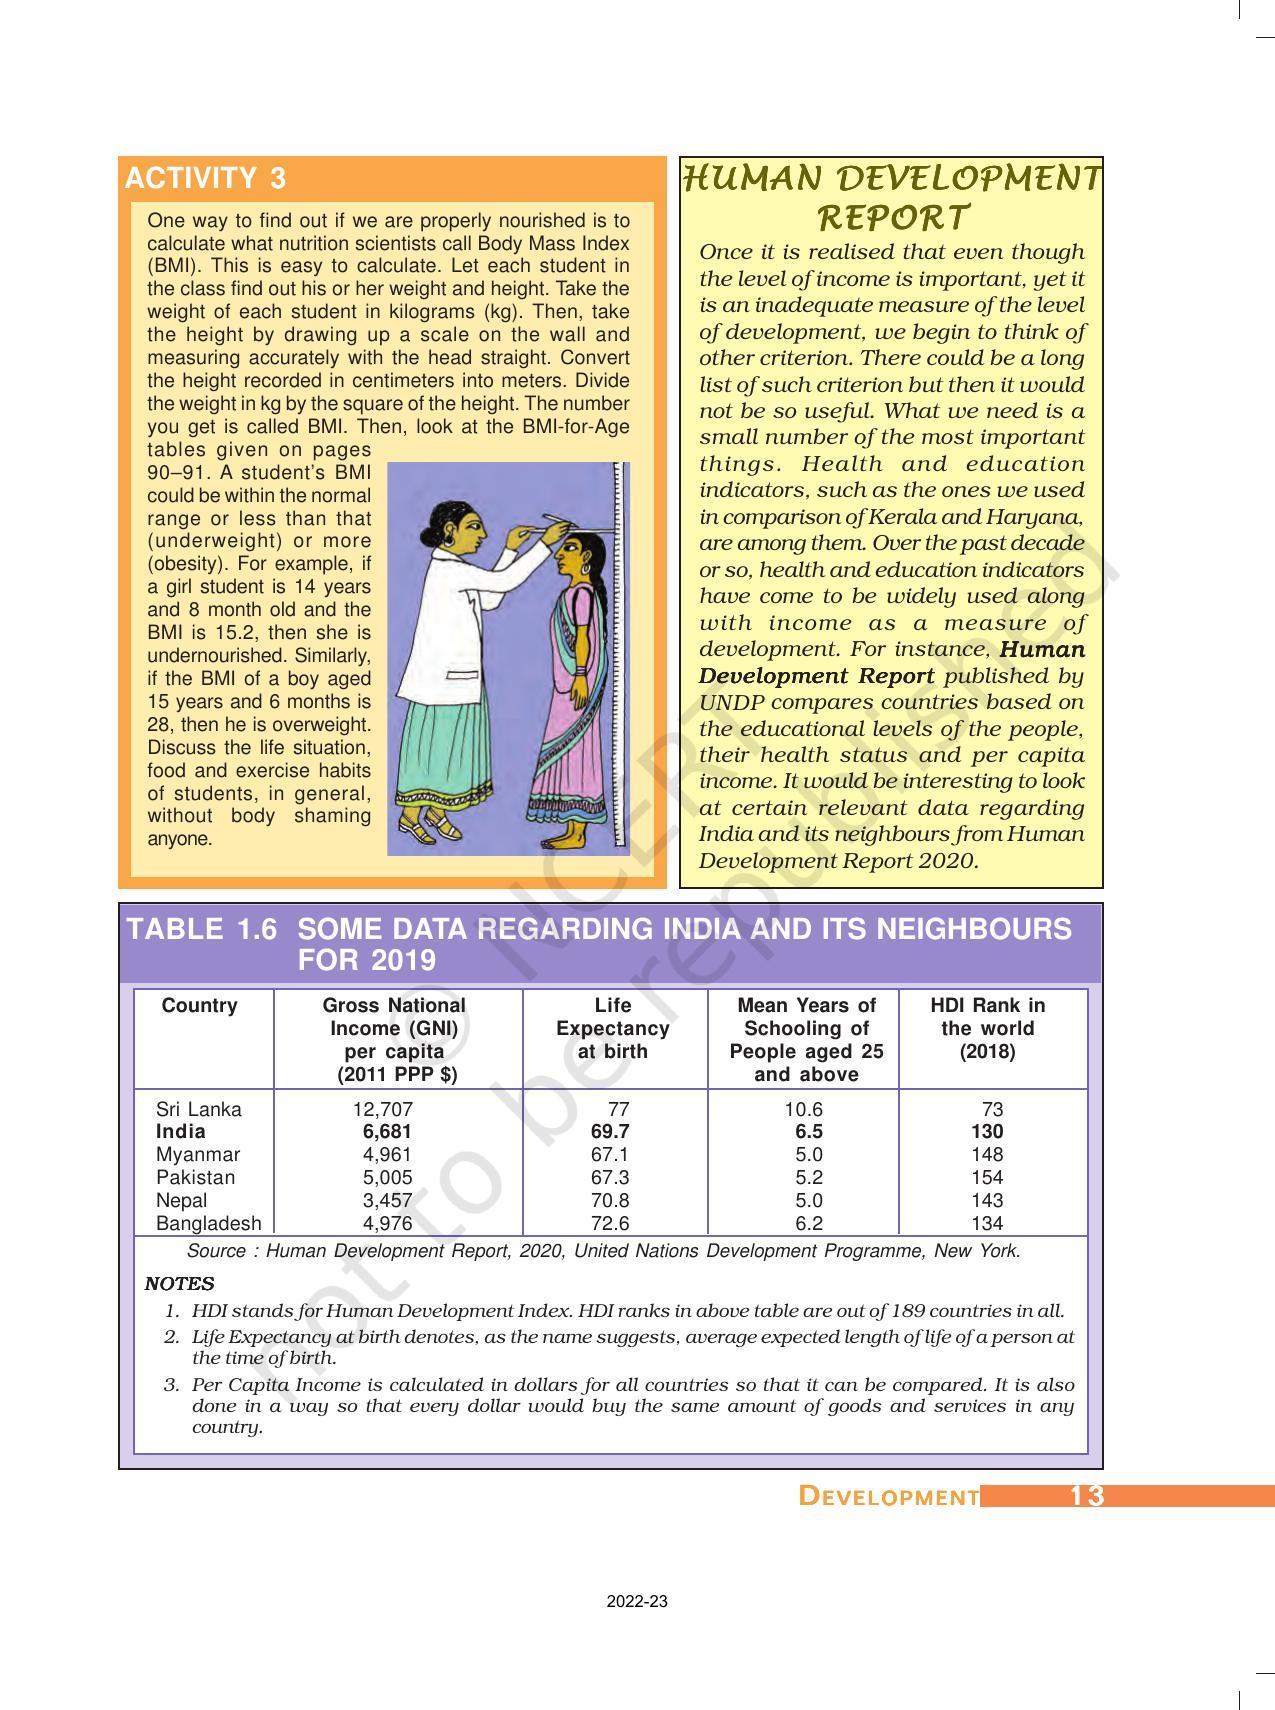 NCERT Book for Class 10 Economics Chapter 1 Development - Page 12